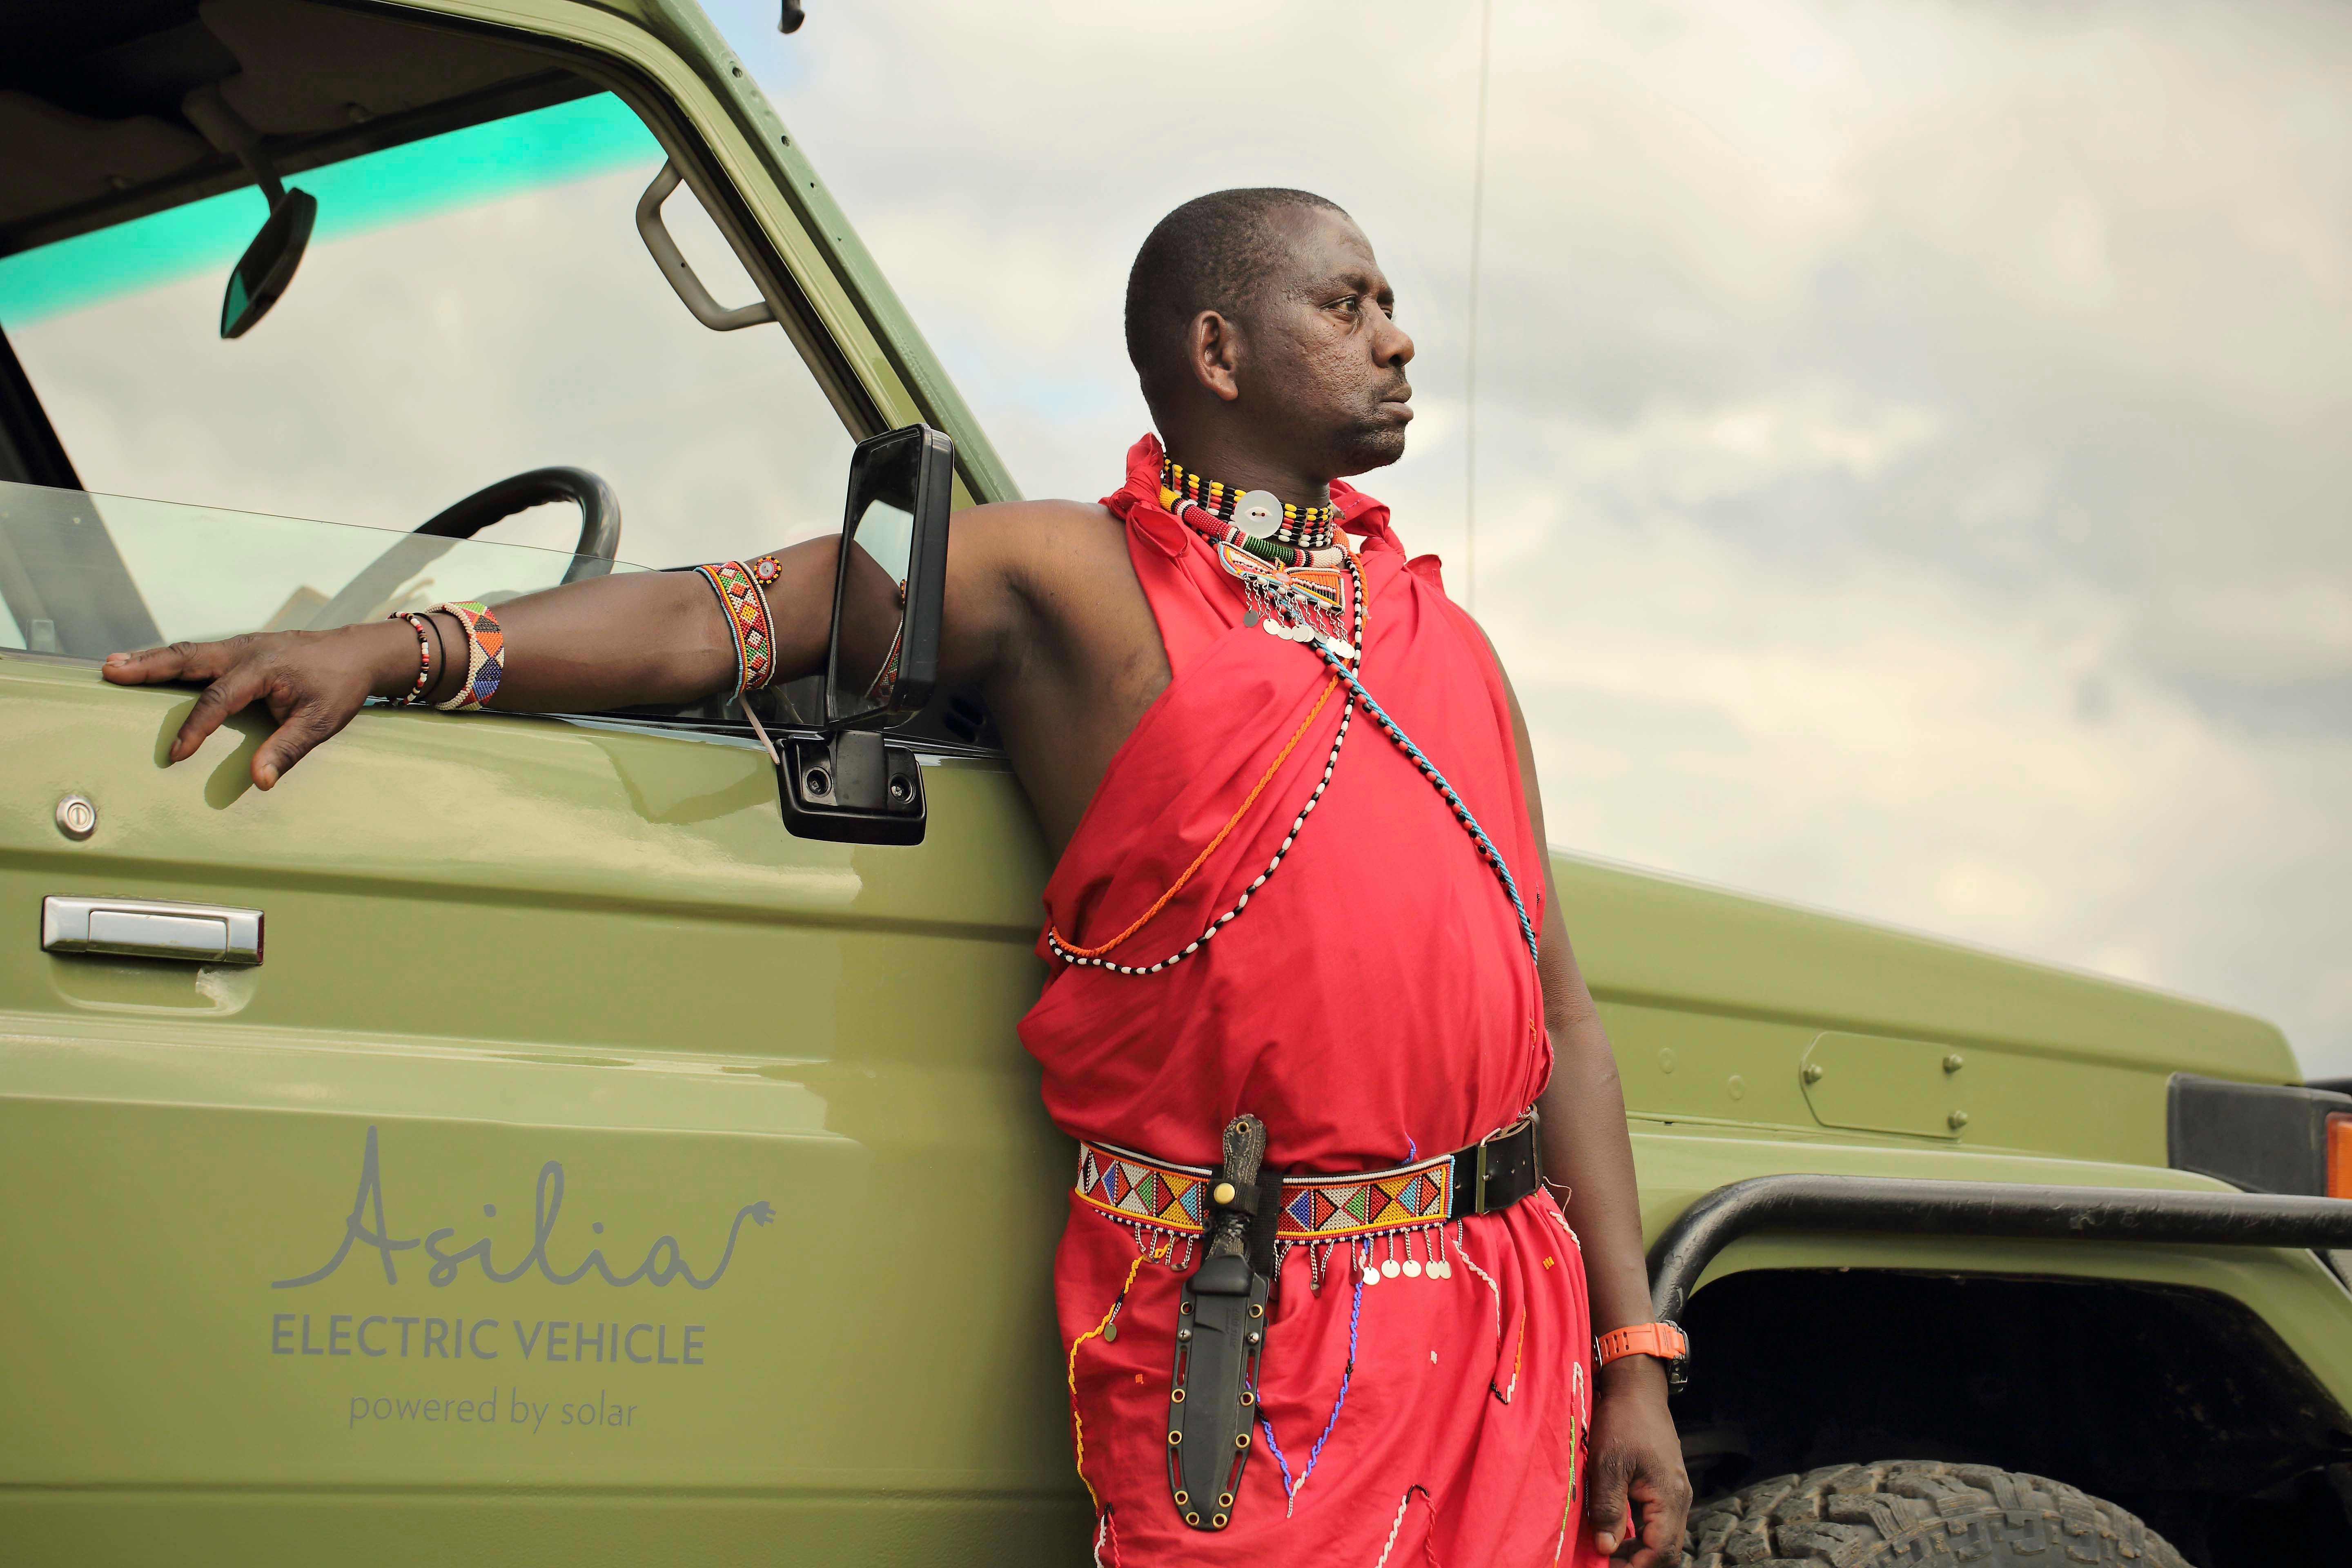 Don't miss out on an authentic African safari Kenya experience.